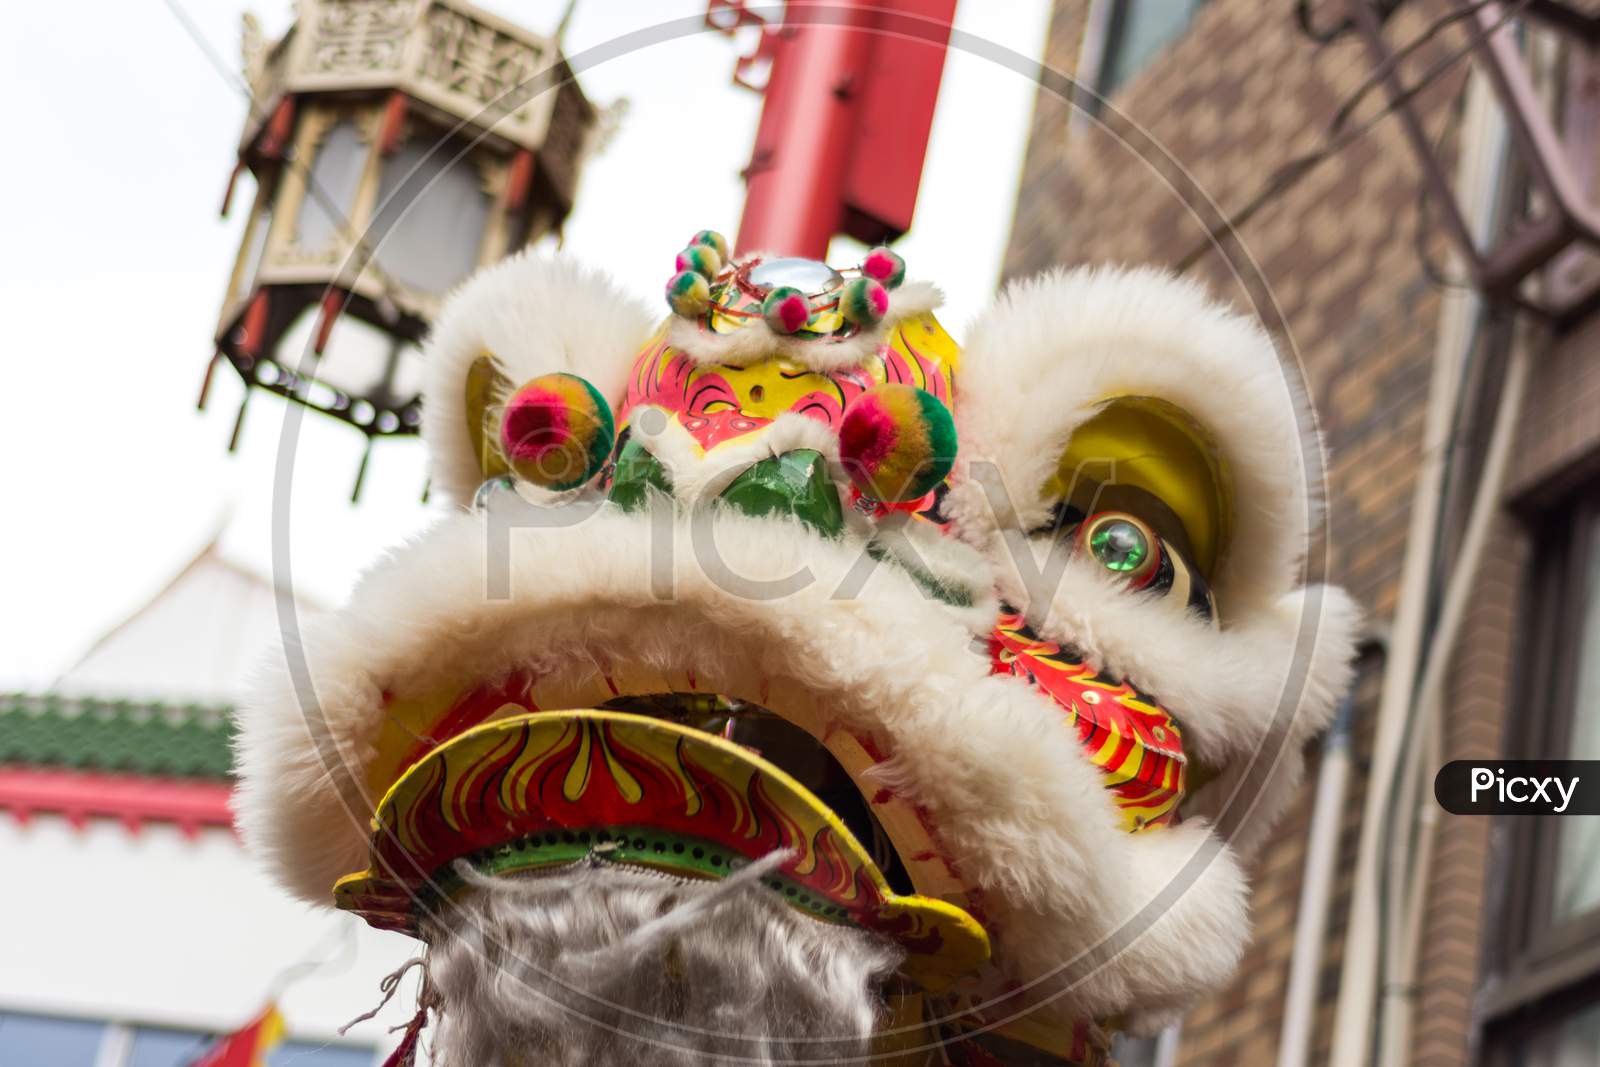 Traditional Dragon Dance During Lunar New Year Celebration In Chinatown In Kobe, Japan